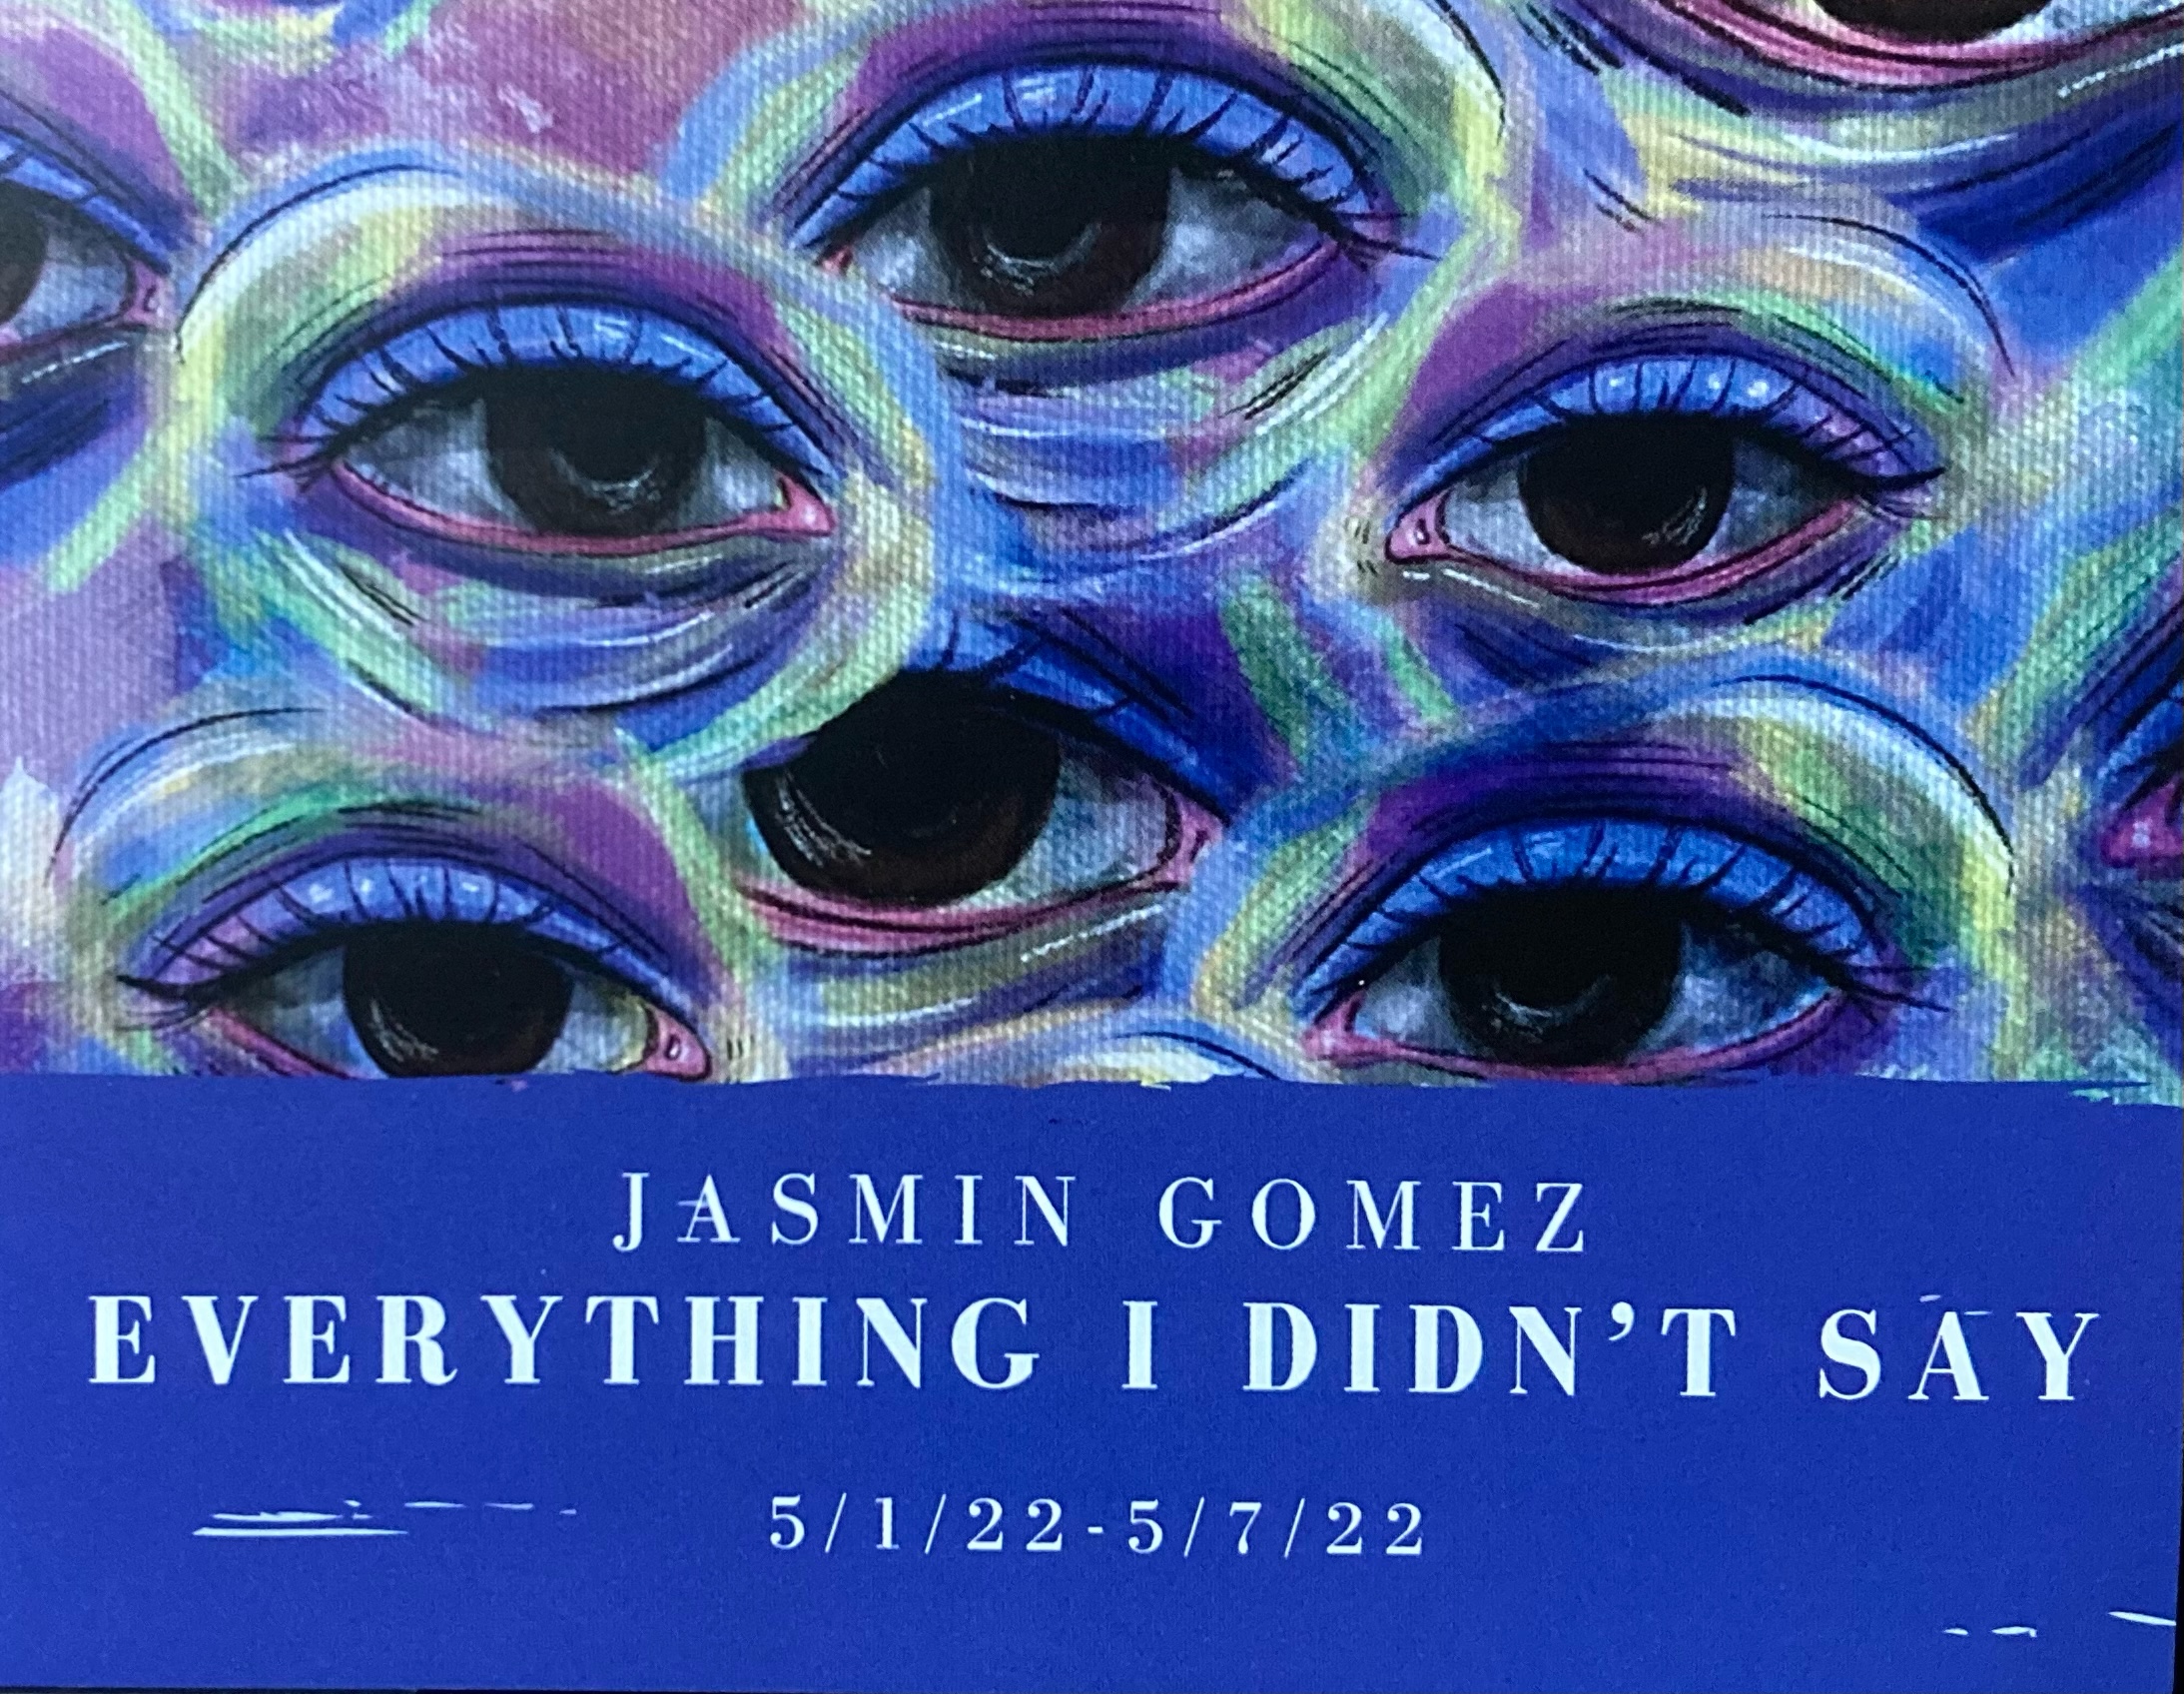 Library Gallery Presents: Everything I Didn’t Say